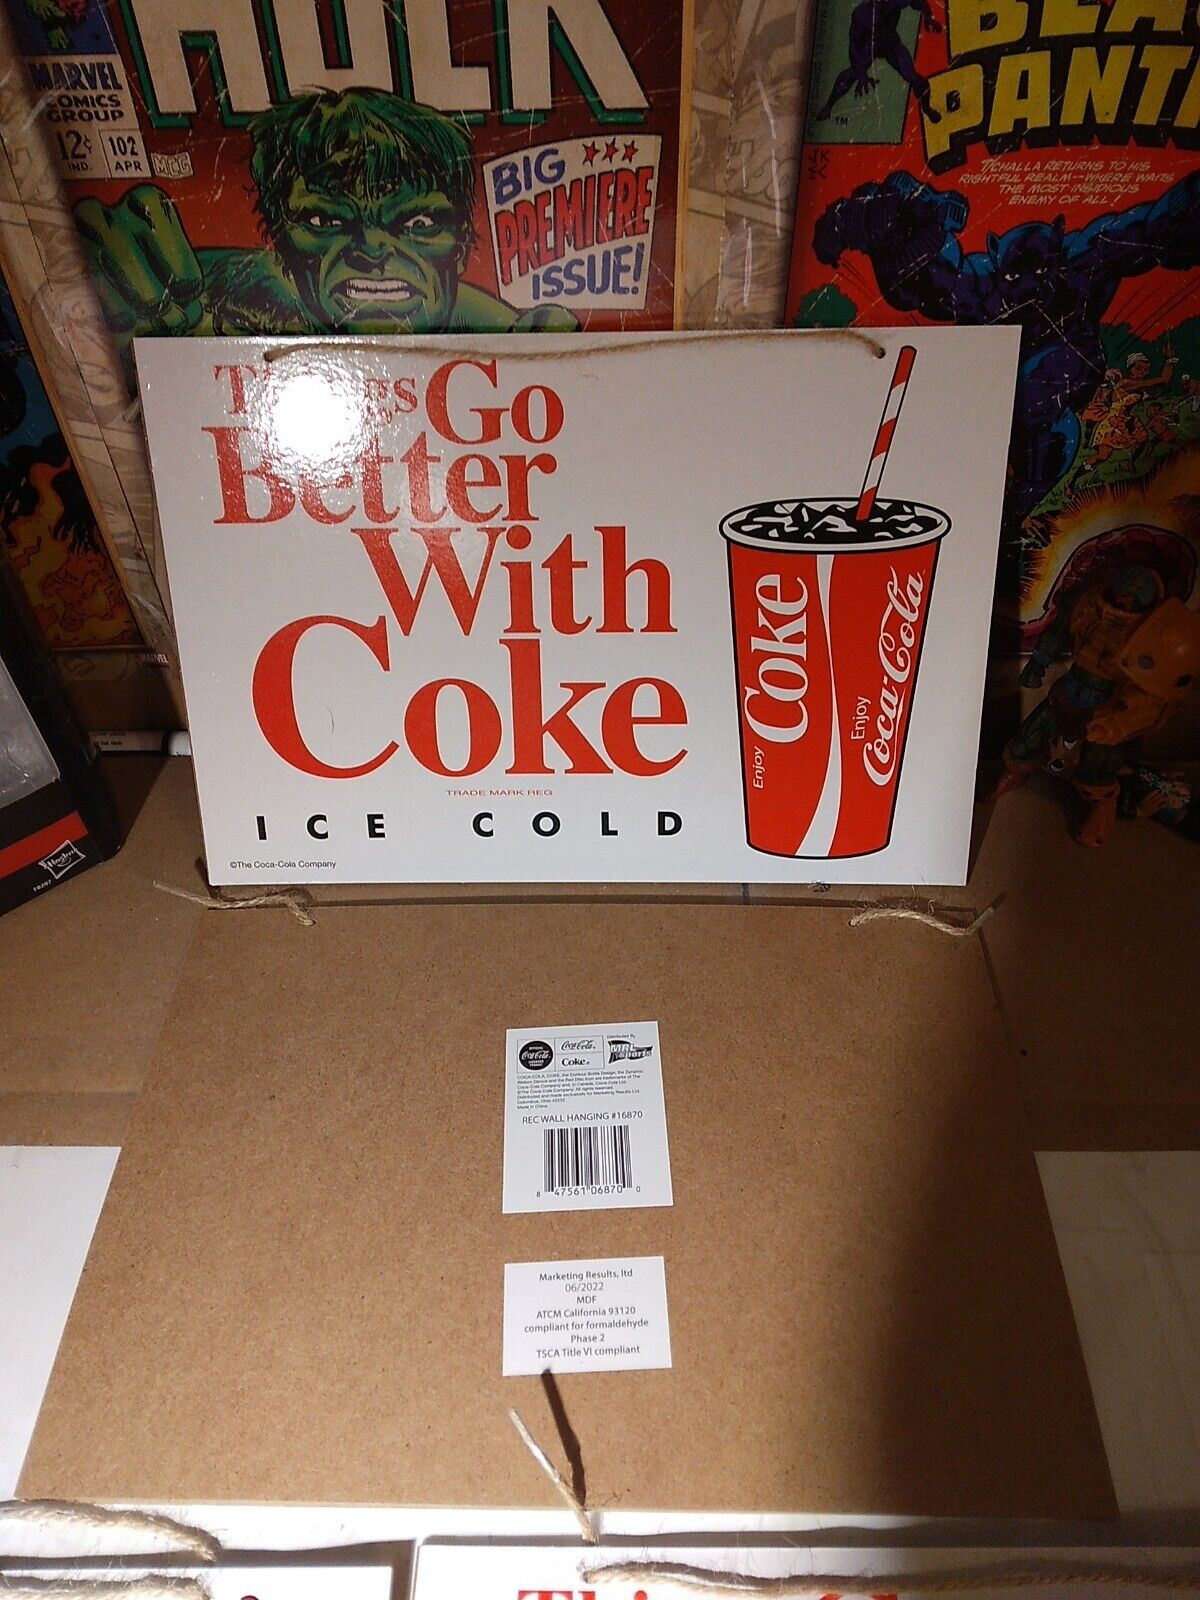 Coke Coka Cola Hanging Pictures 11×8.5 In